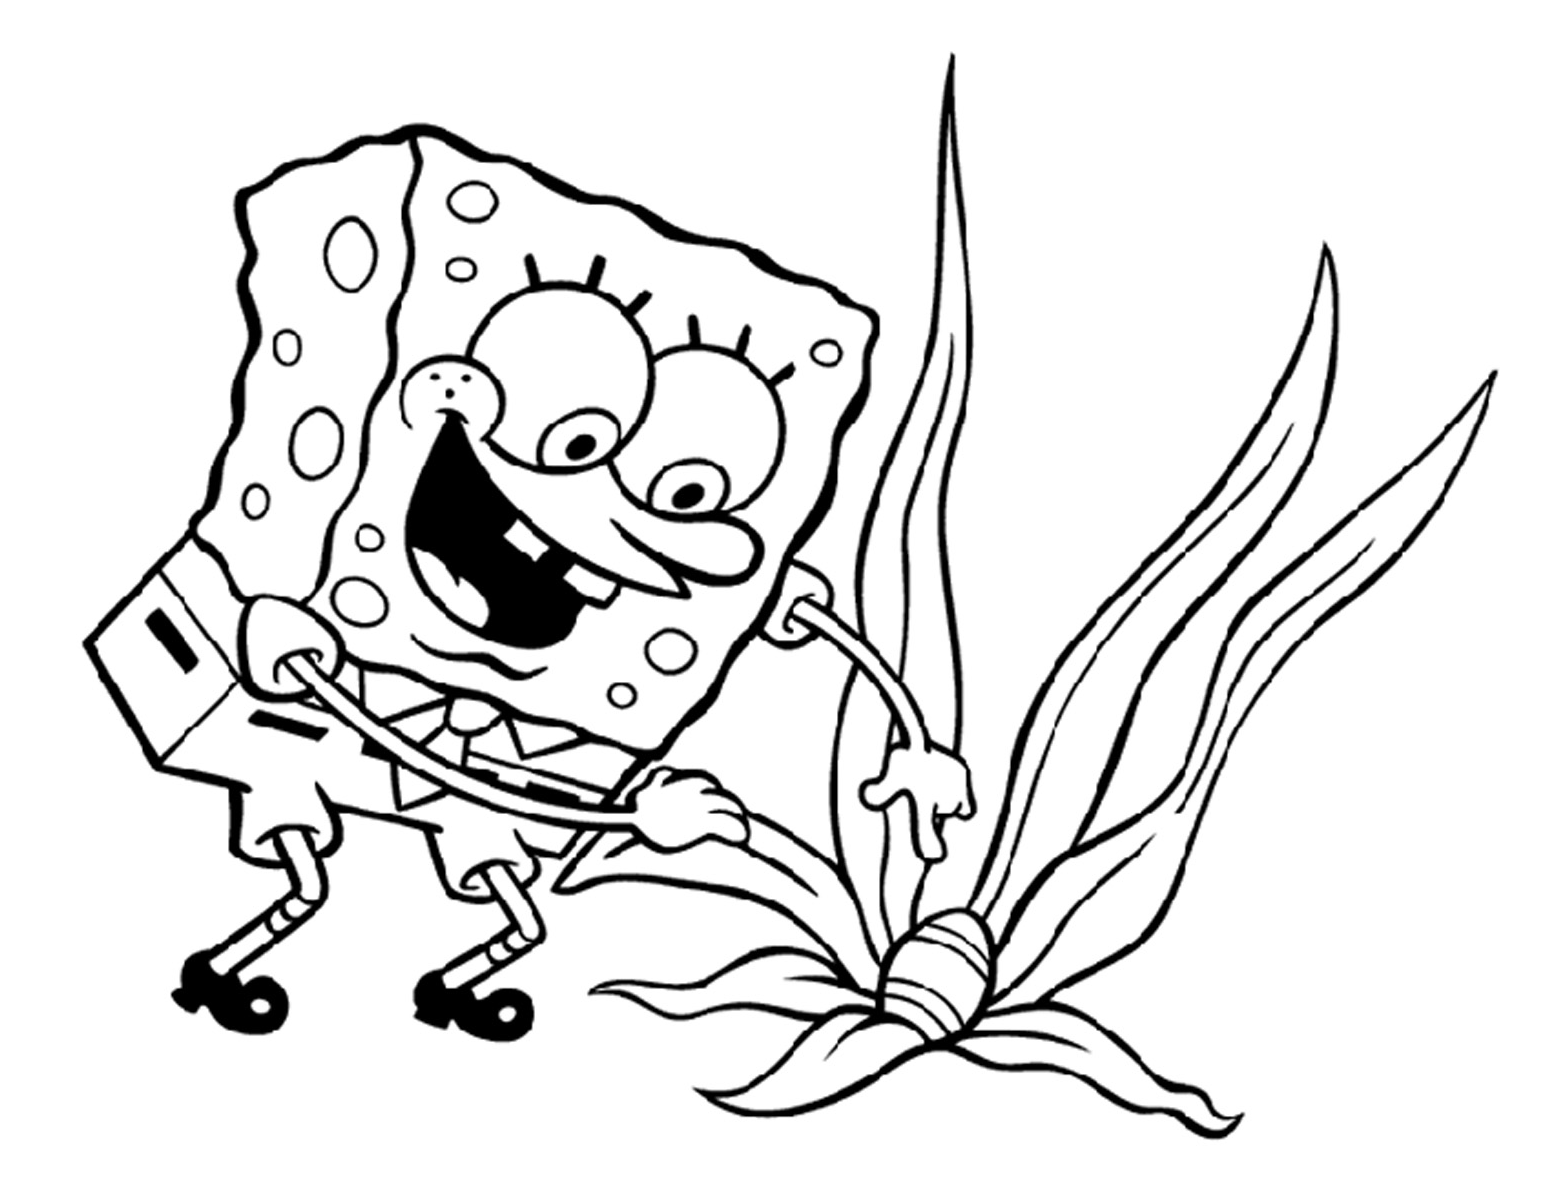 a coloring pages of spongebob - photo #24